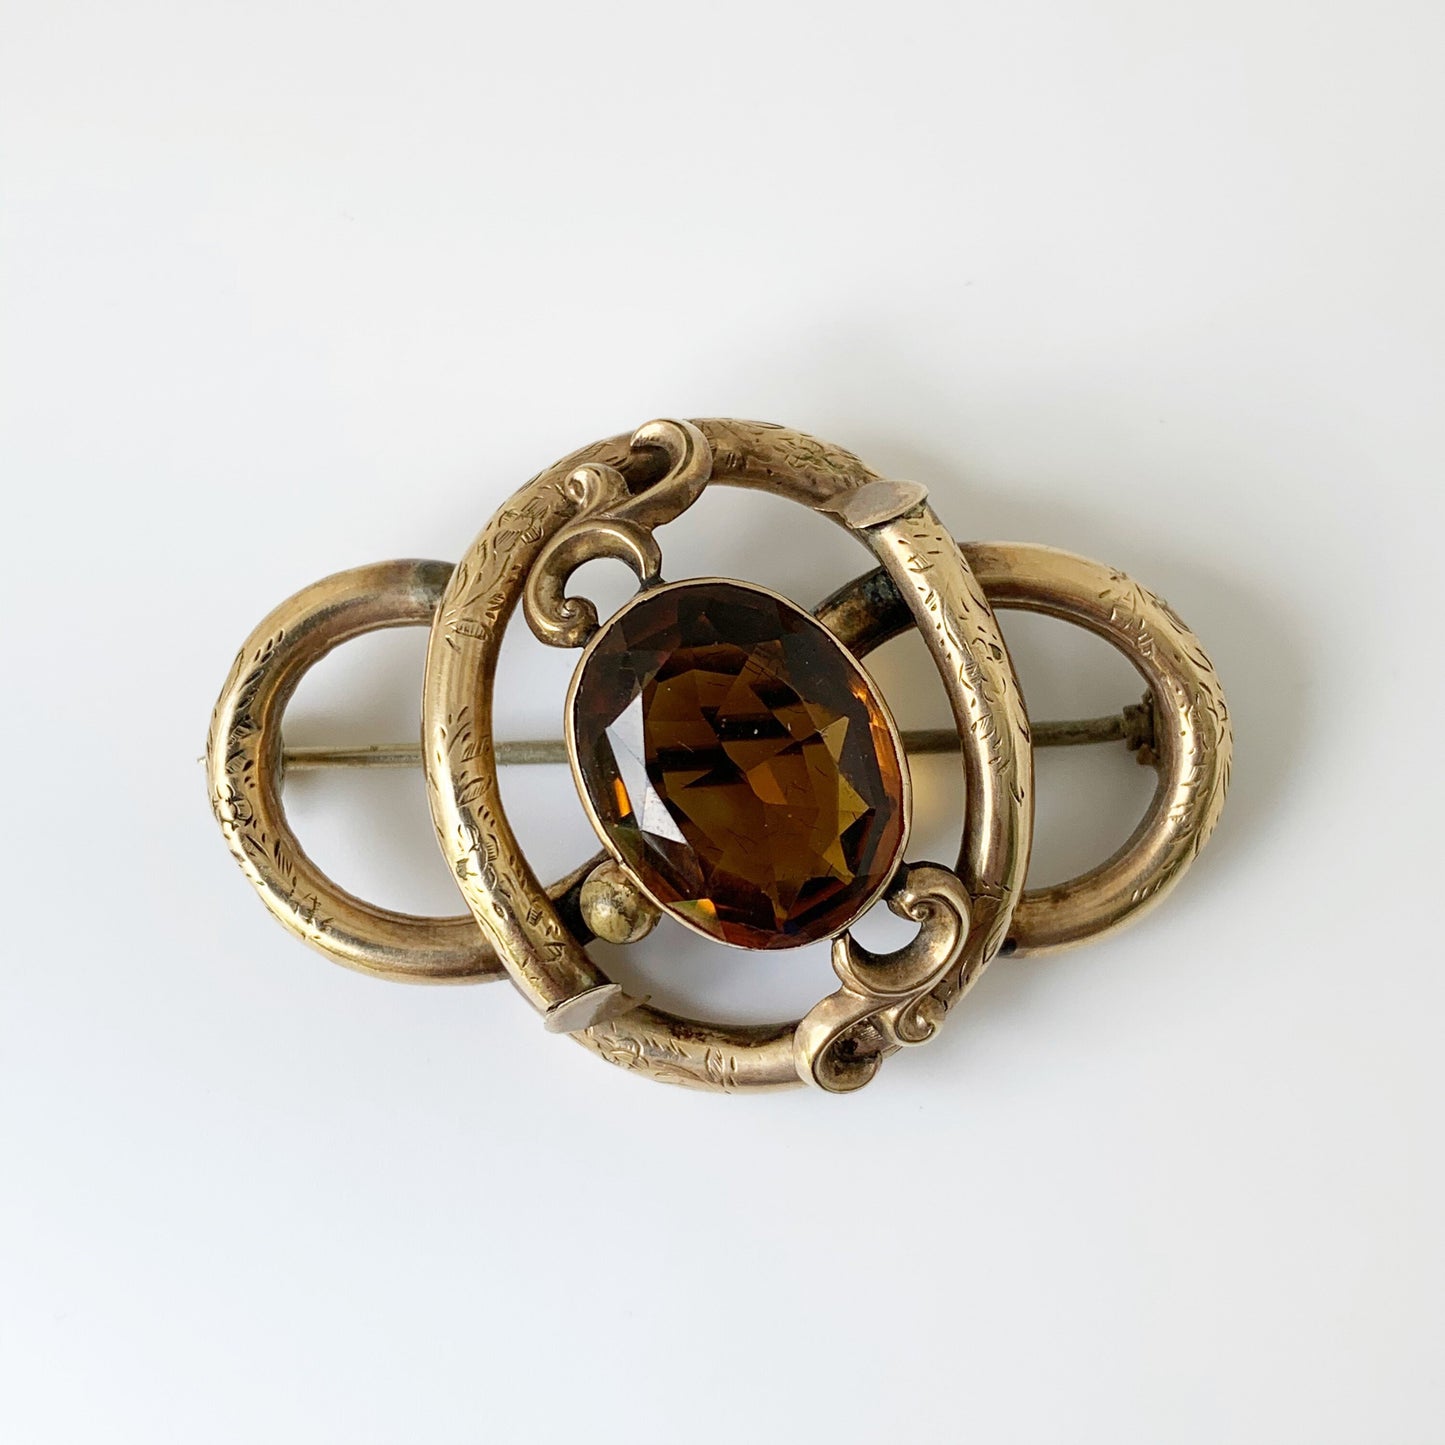 Antique Victorian Love Knot Brooch | Victorian Brown Stone Brooch